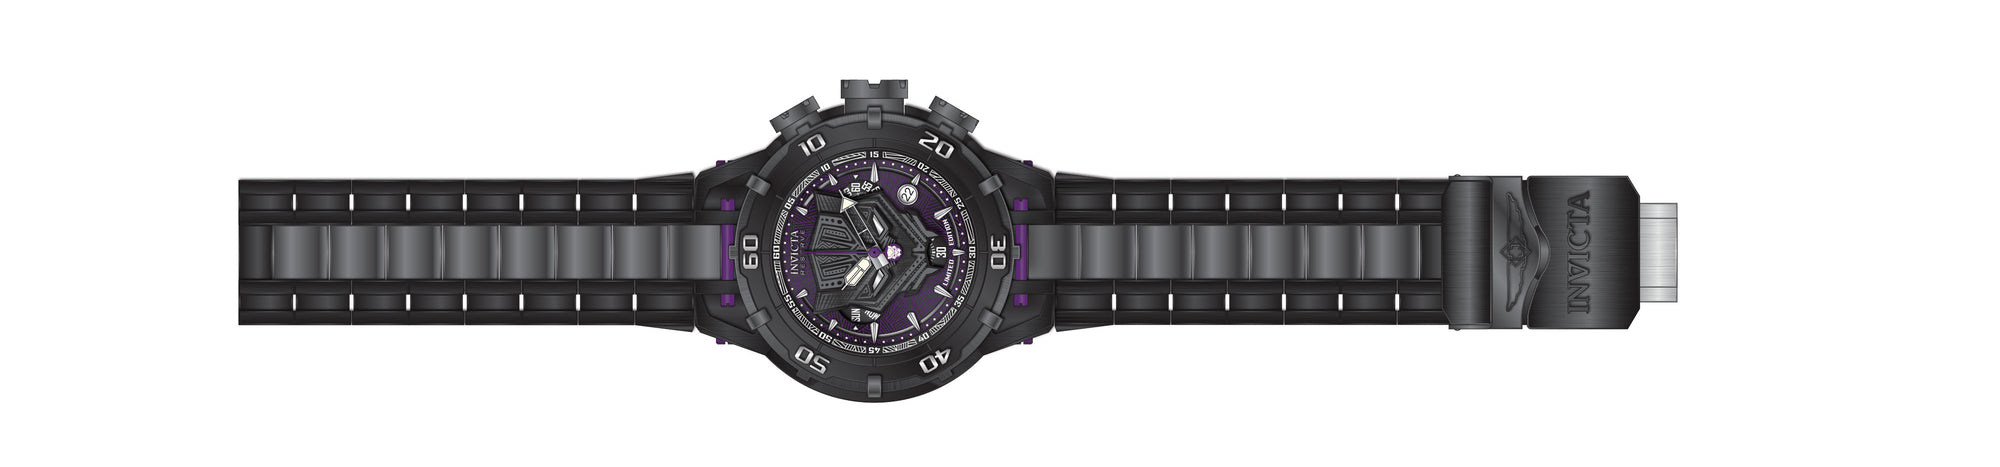 Band For Invicta Marvel 40541